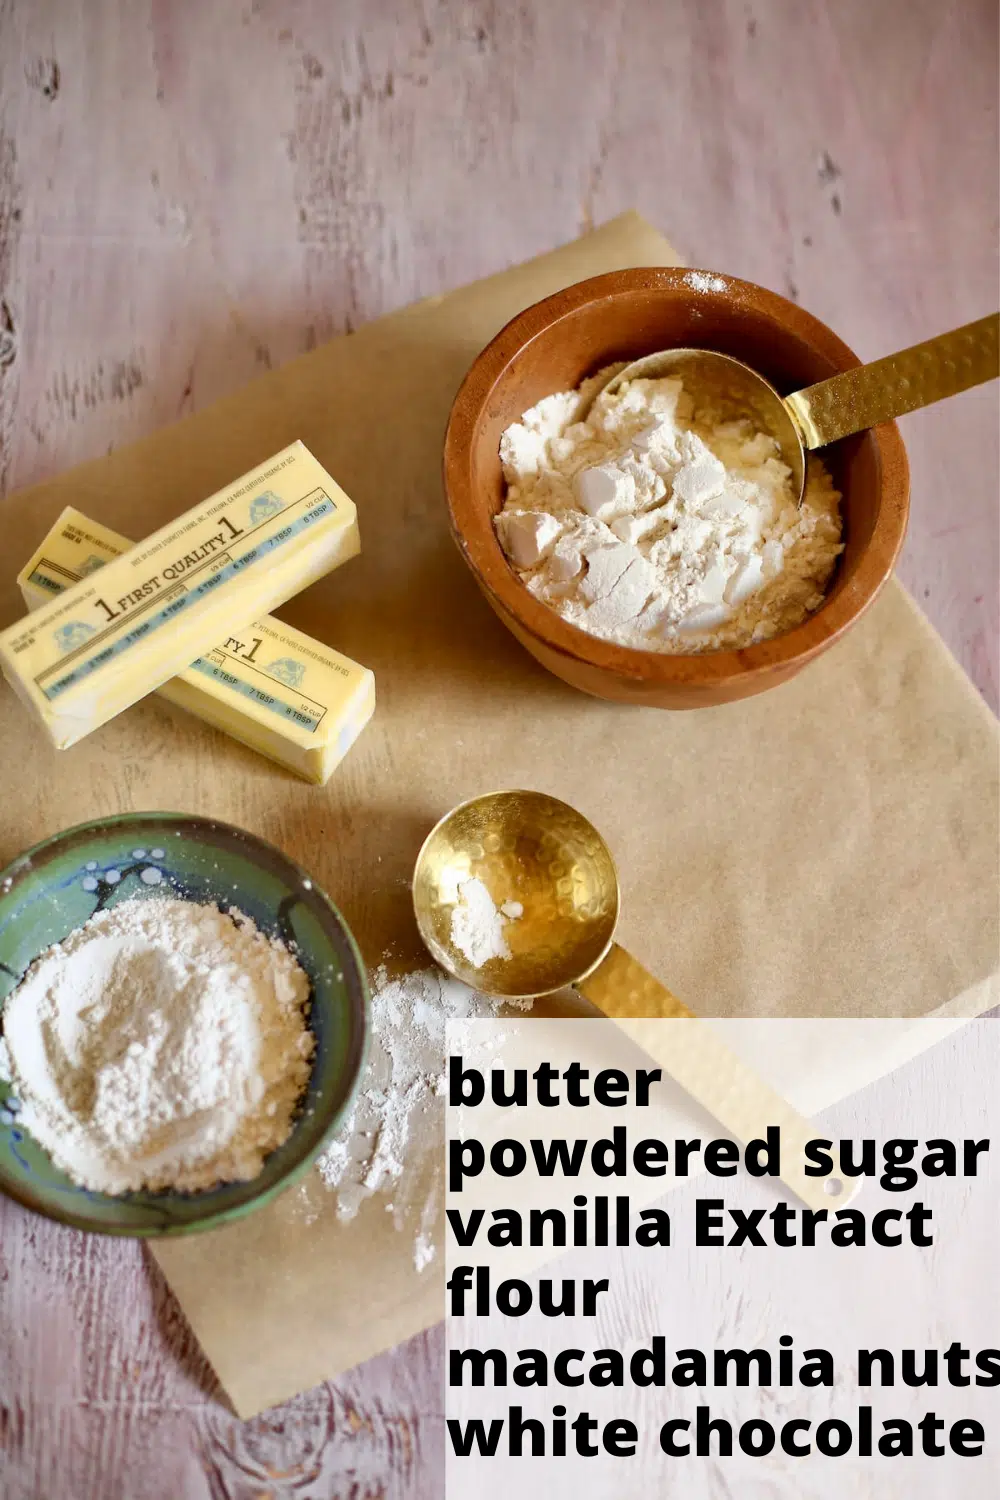 a photo of butter, flour, sugar and measuring spoons on a table with text overlay.